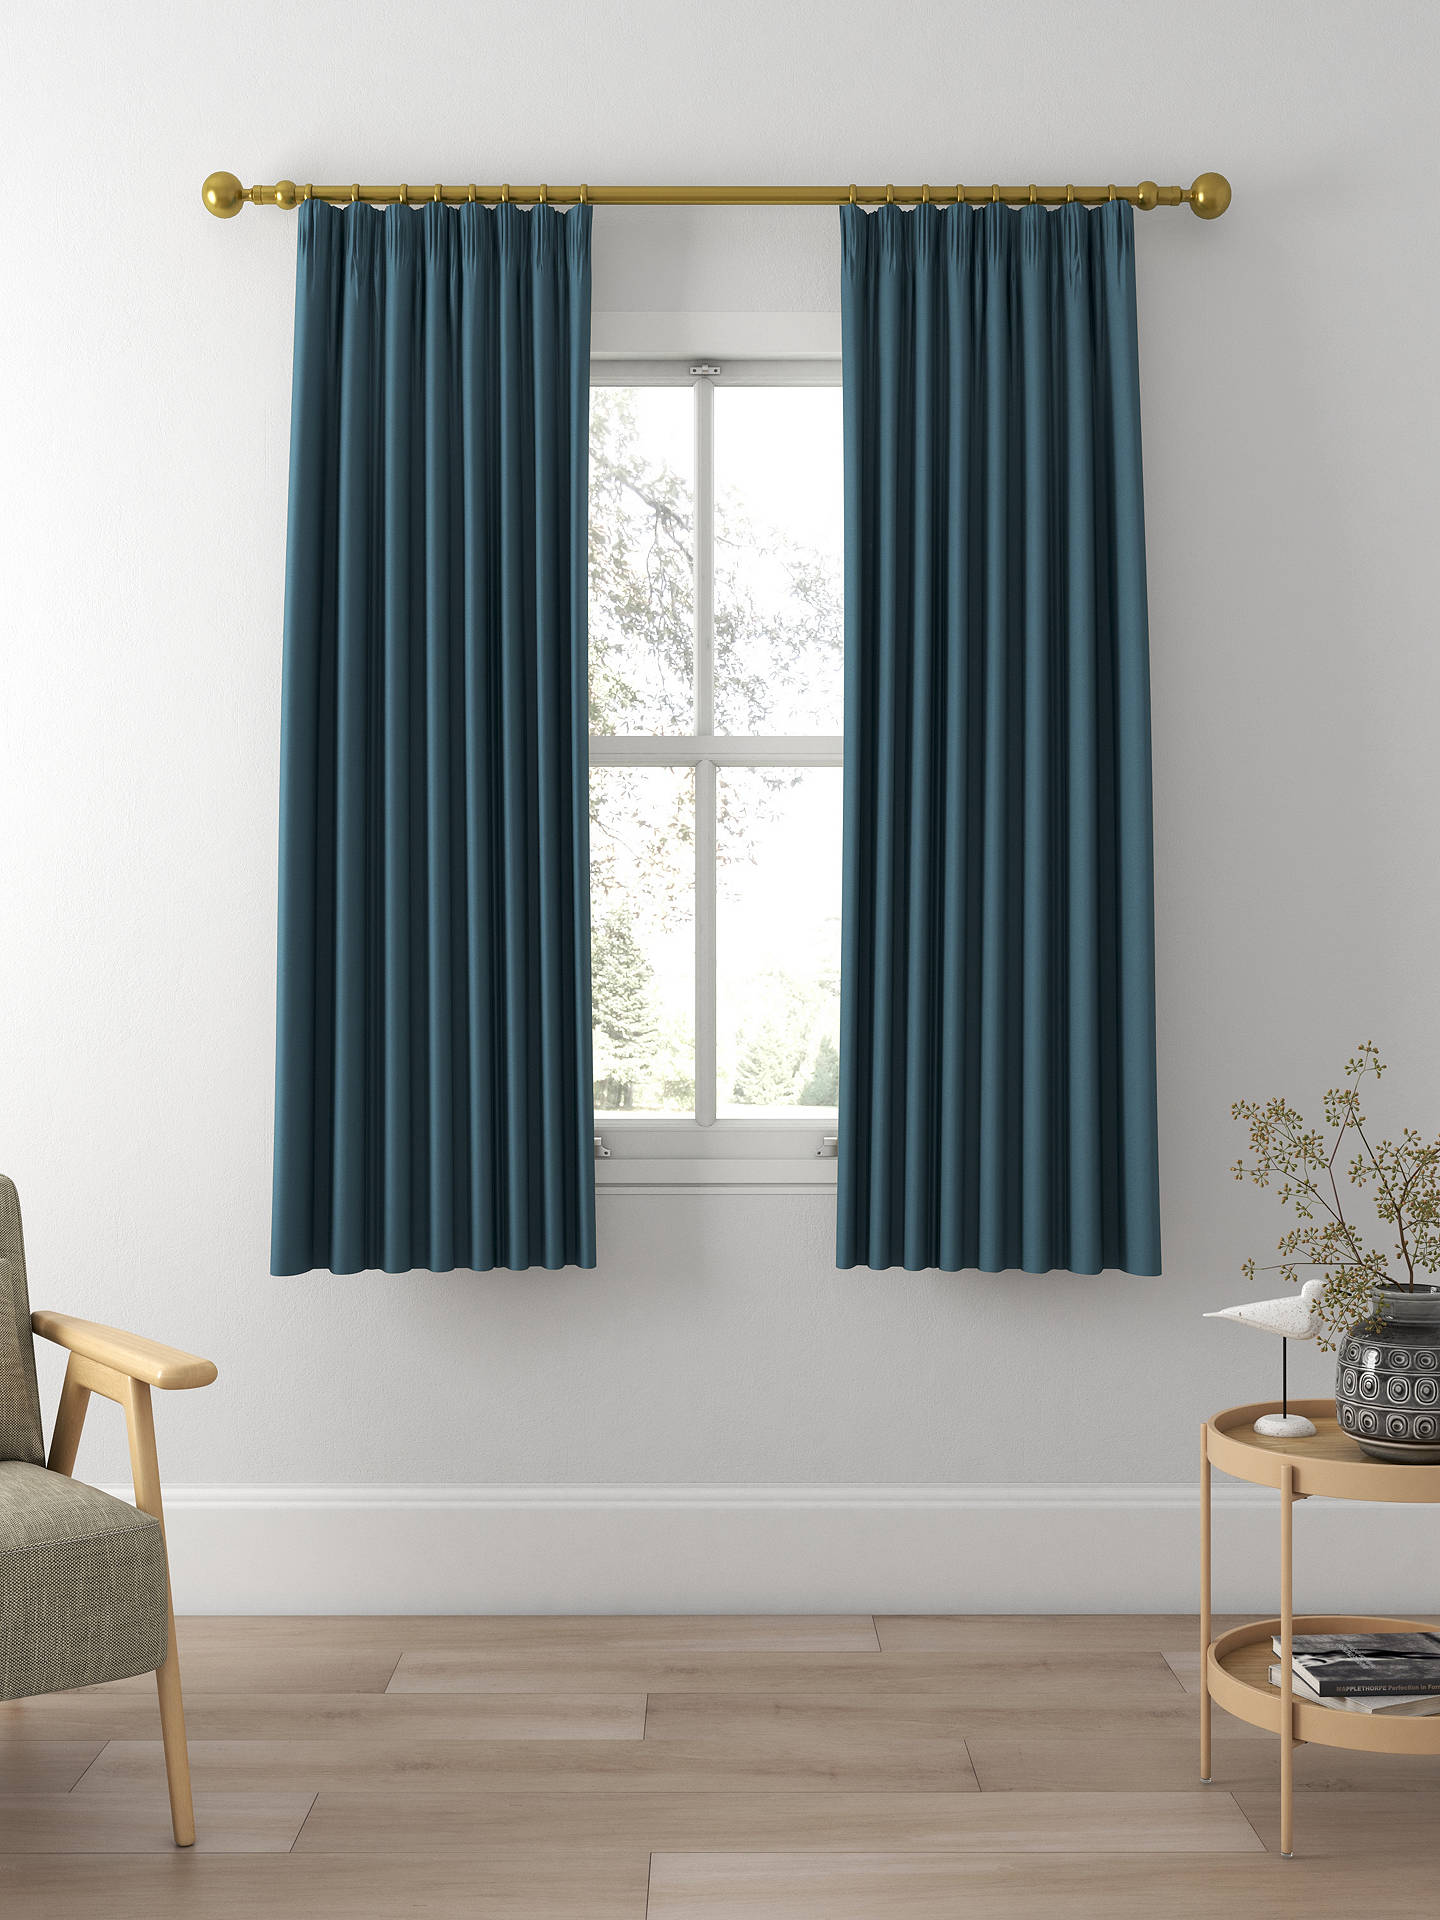 Harlequin Empower Plain Made to Measure Curtains, Riviera